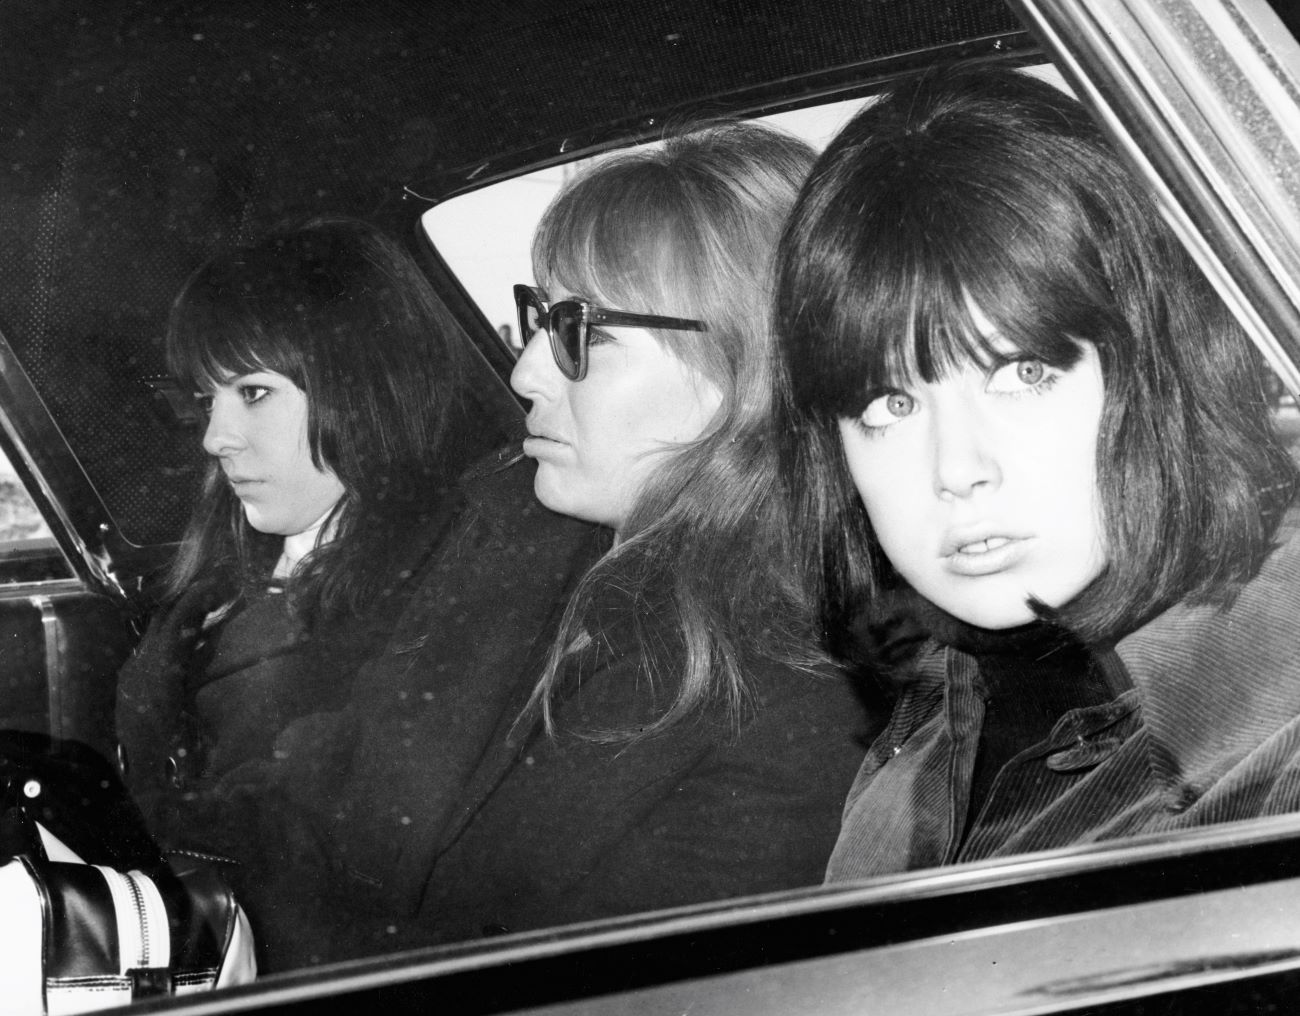 A black and white picture of Maureen Starkey, Cynthia Lennon, and Pattie Boyd sitting in a car together.